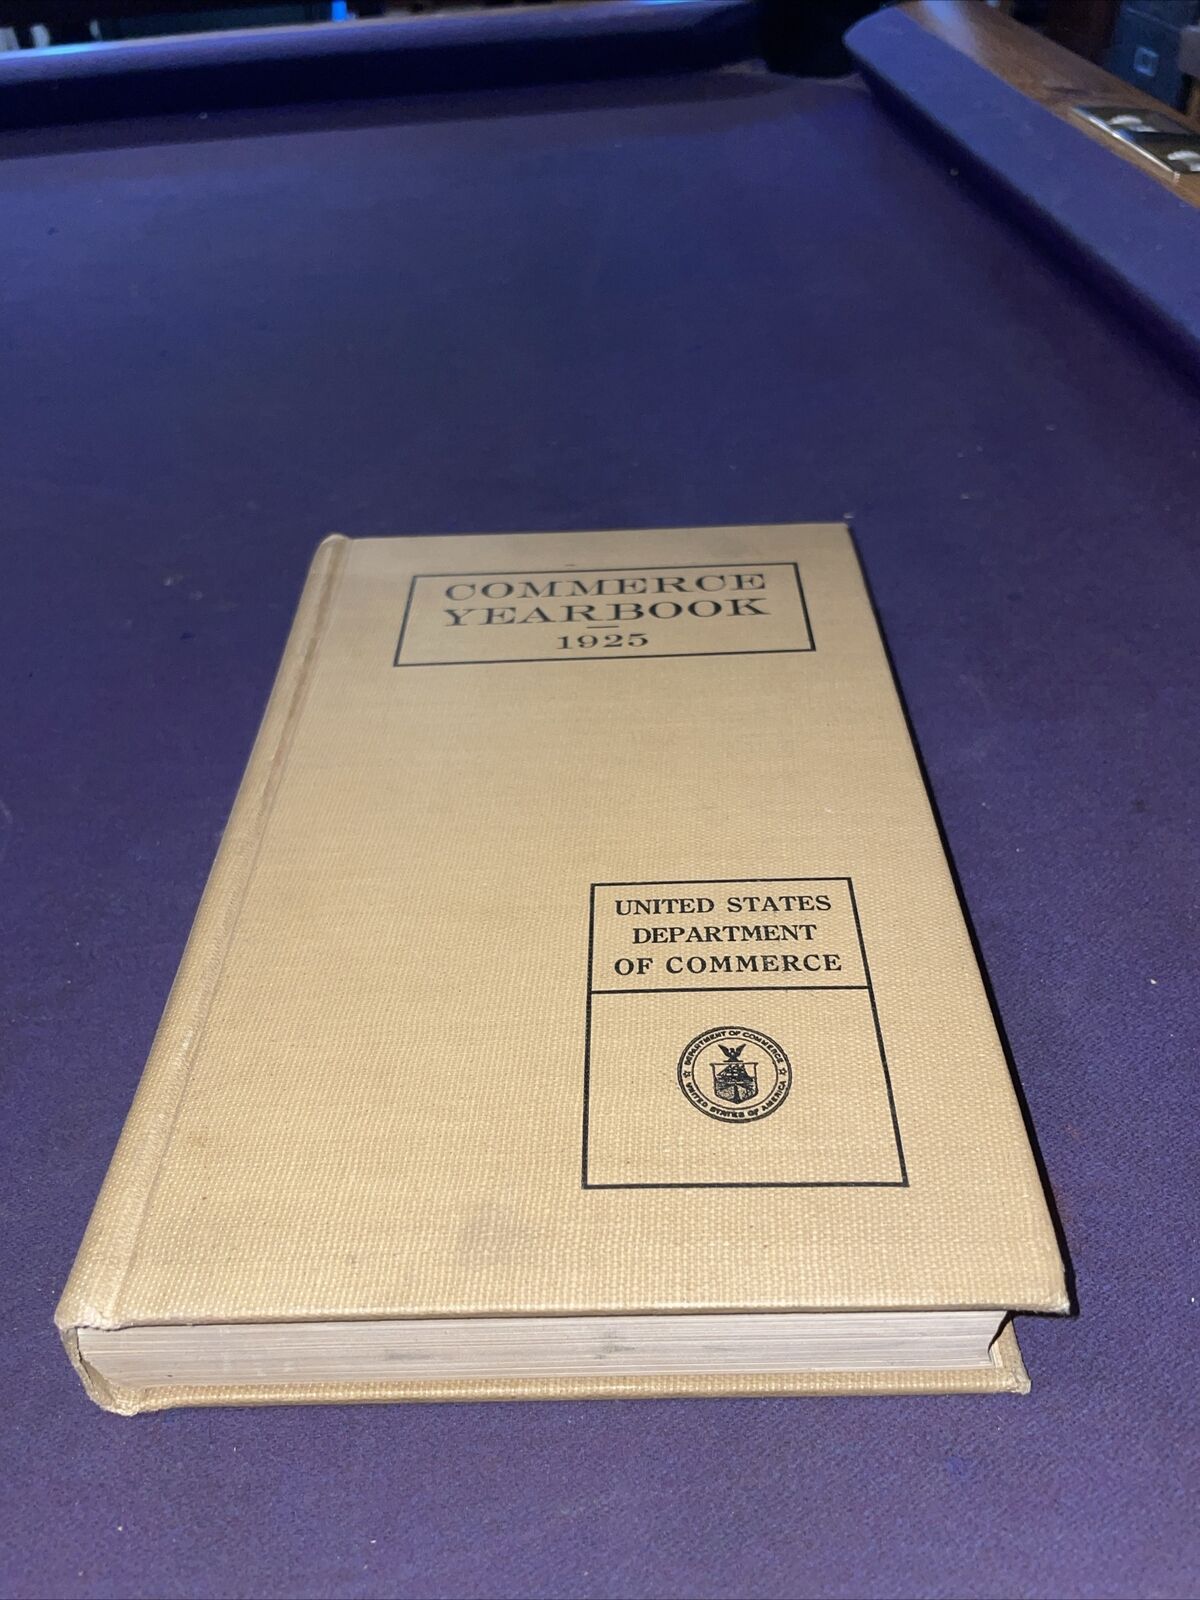 COMMERCE YEARBOOK 1925 US Department of Commerce 1926 First ECONOMIC HISTORY